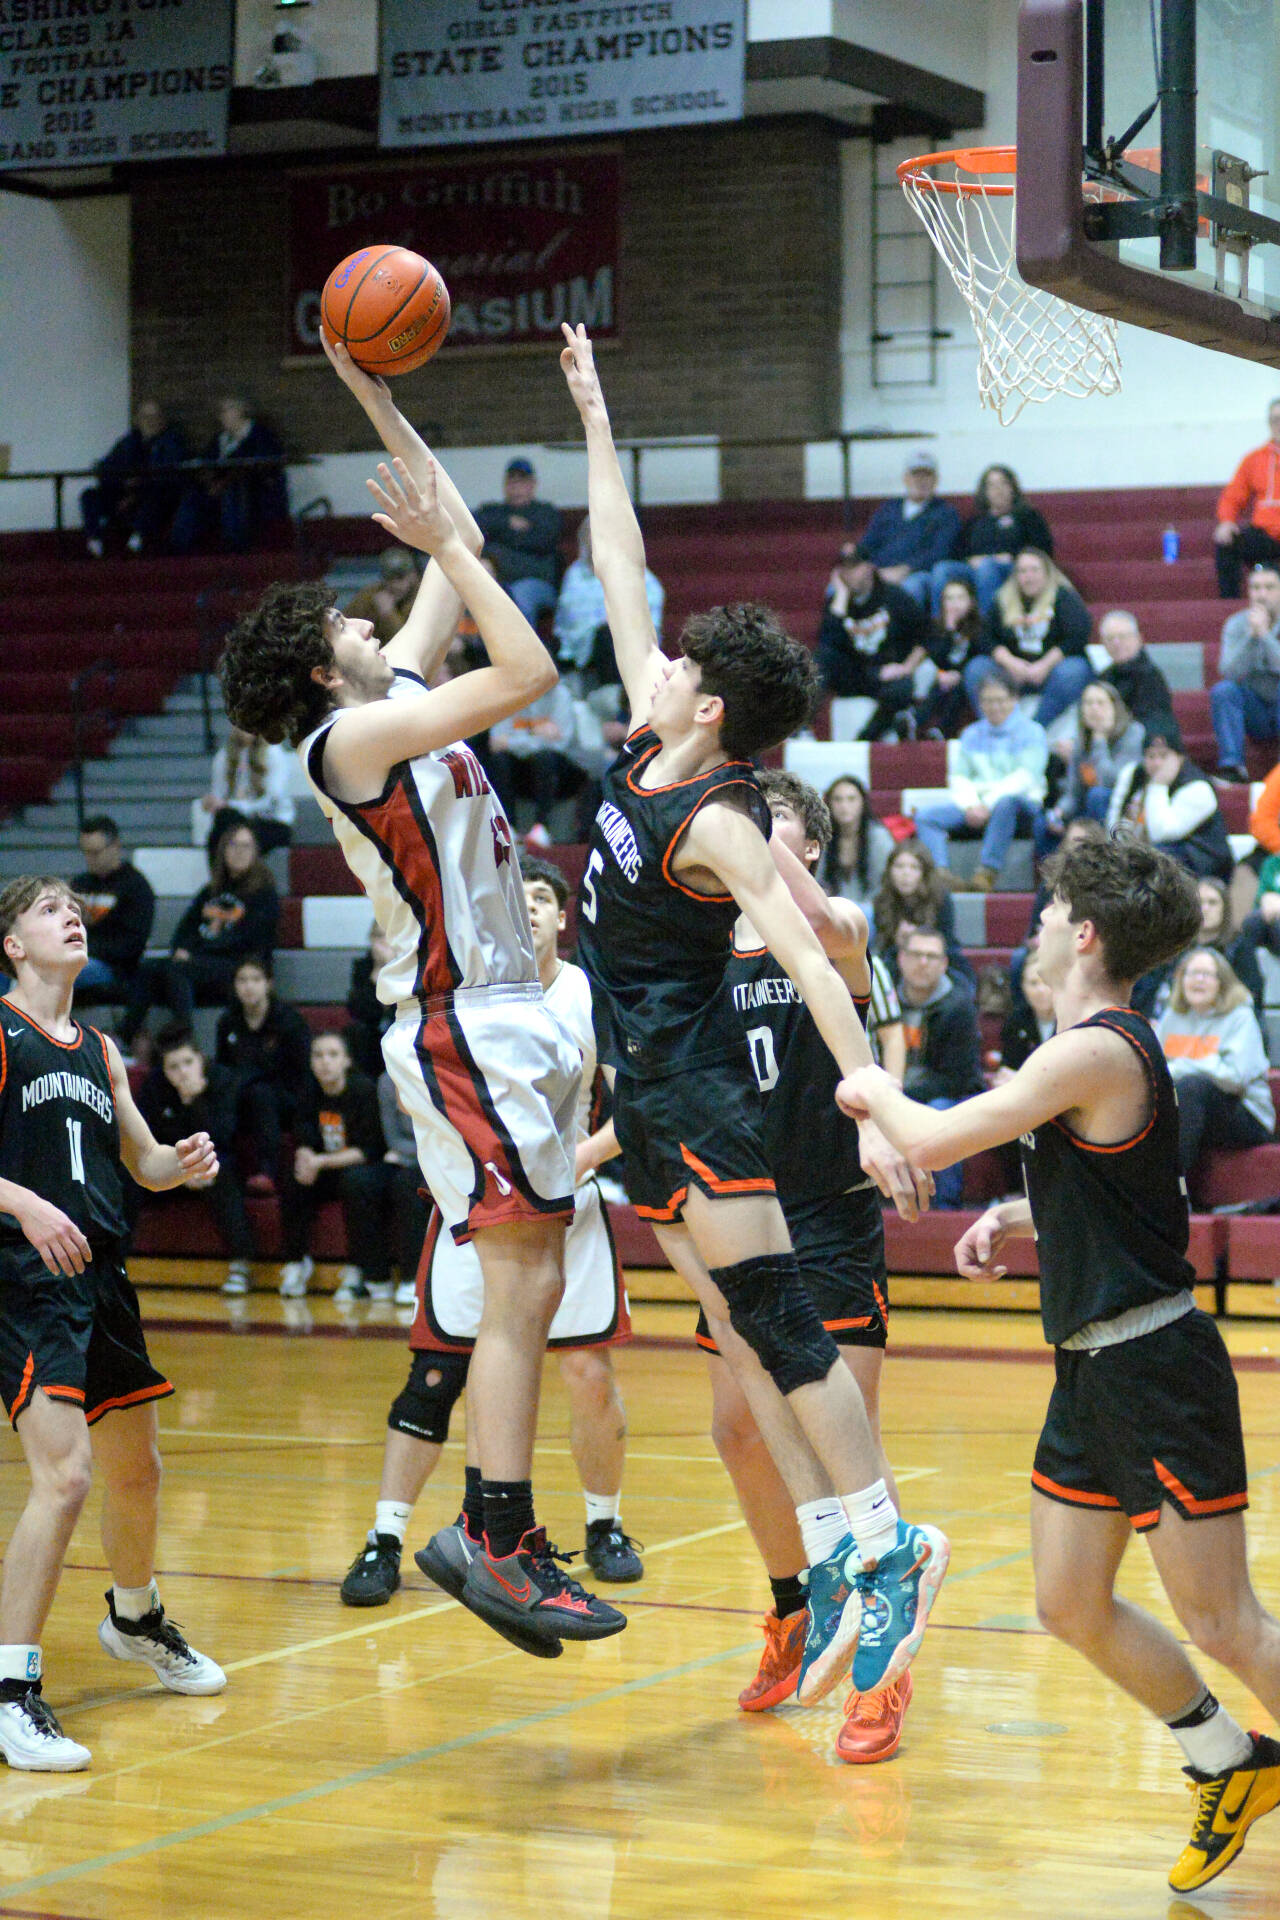 RYAN SPARKS | THE DAILY WORLD Ocosta’s Mark Lewis, left, scores against Rainier’s Gavin Owen (5) during the Wildcats’ 64-62 loss in the first round of the 2B District 4 Tournament on Saturday at Montesano High School.